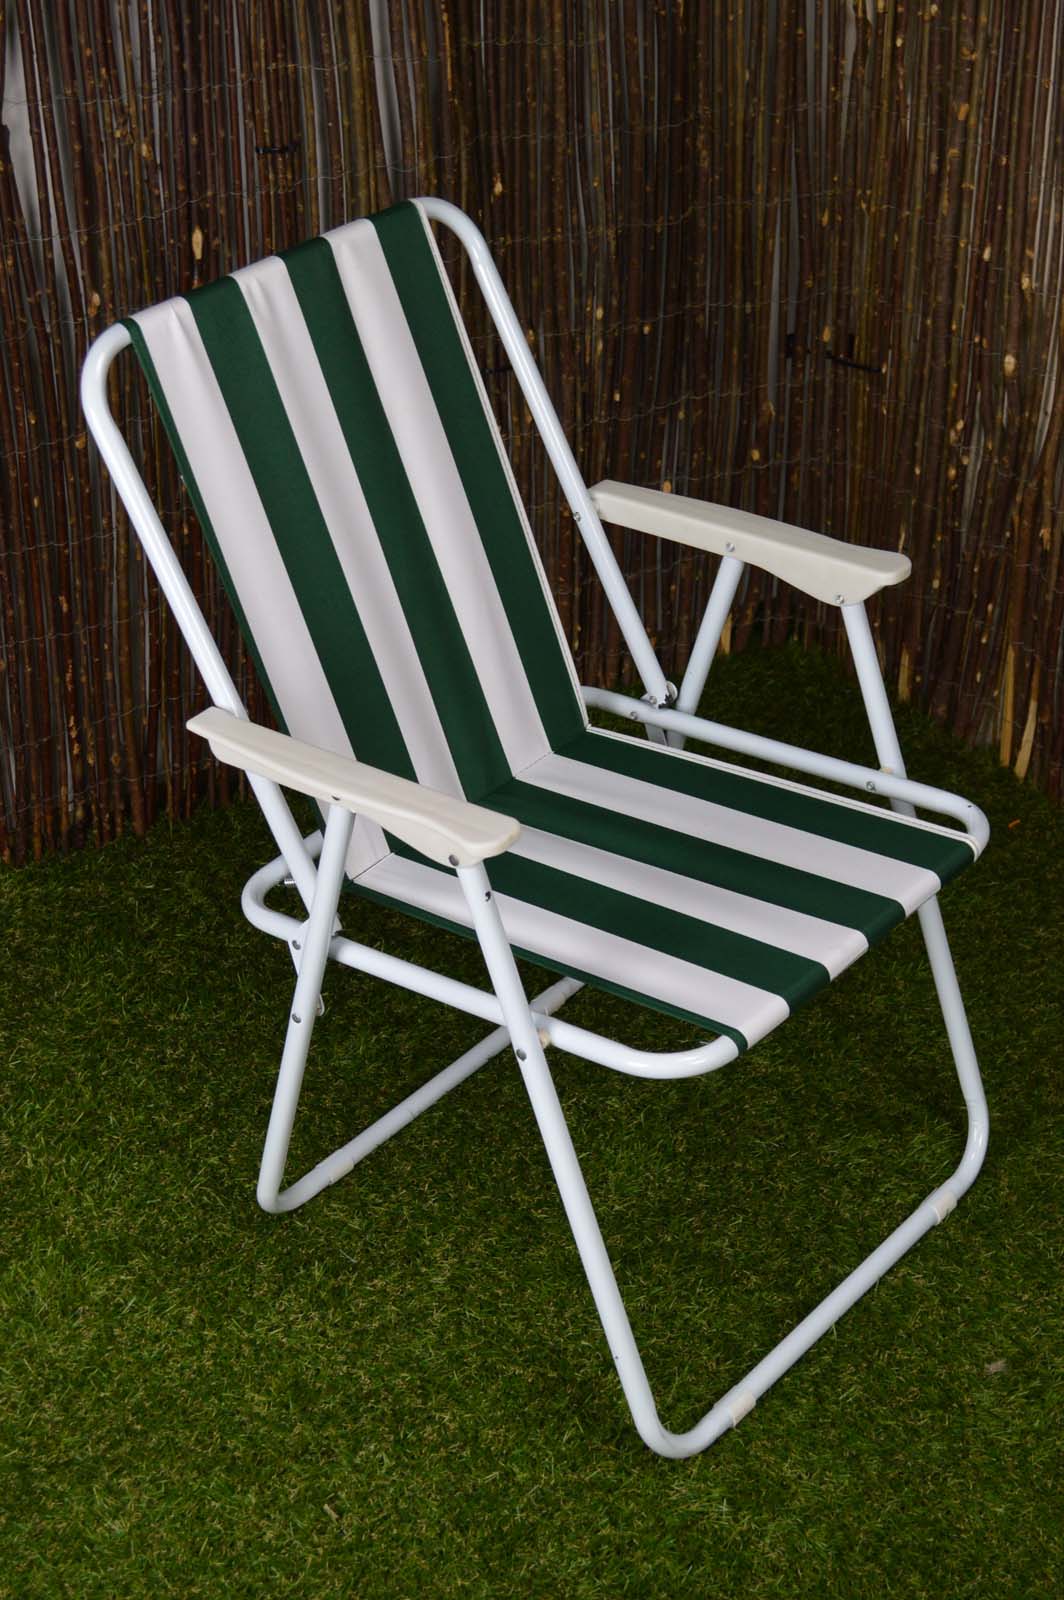 2 Pack of Folding Camping / Picnic Chair in Green and White Garden Patio